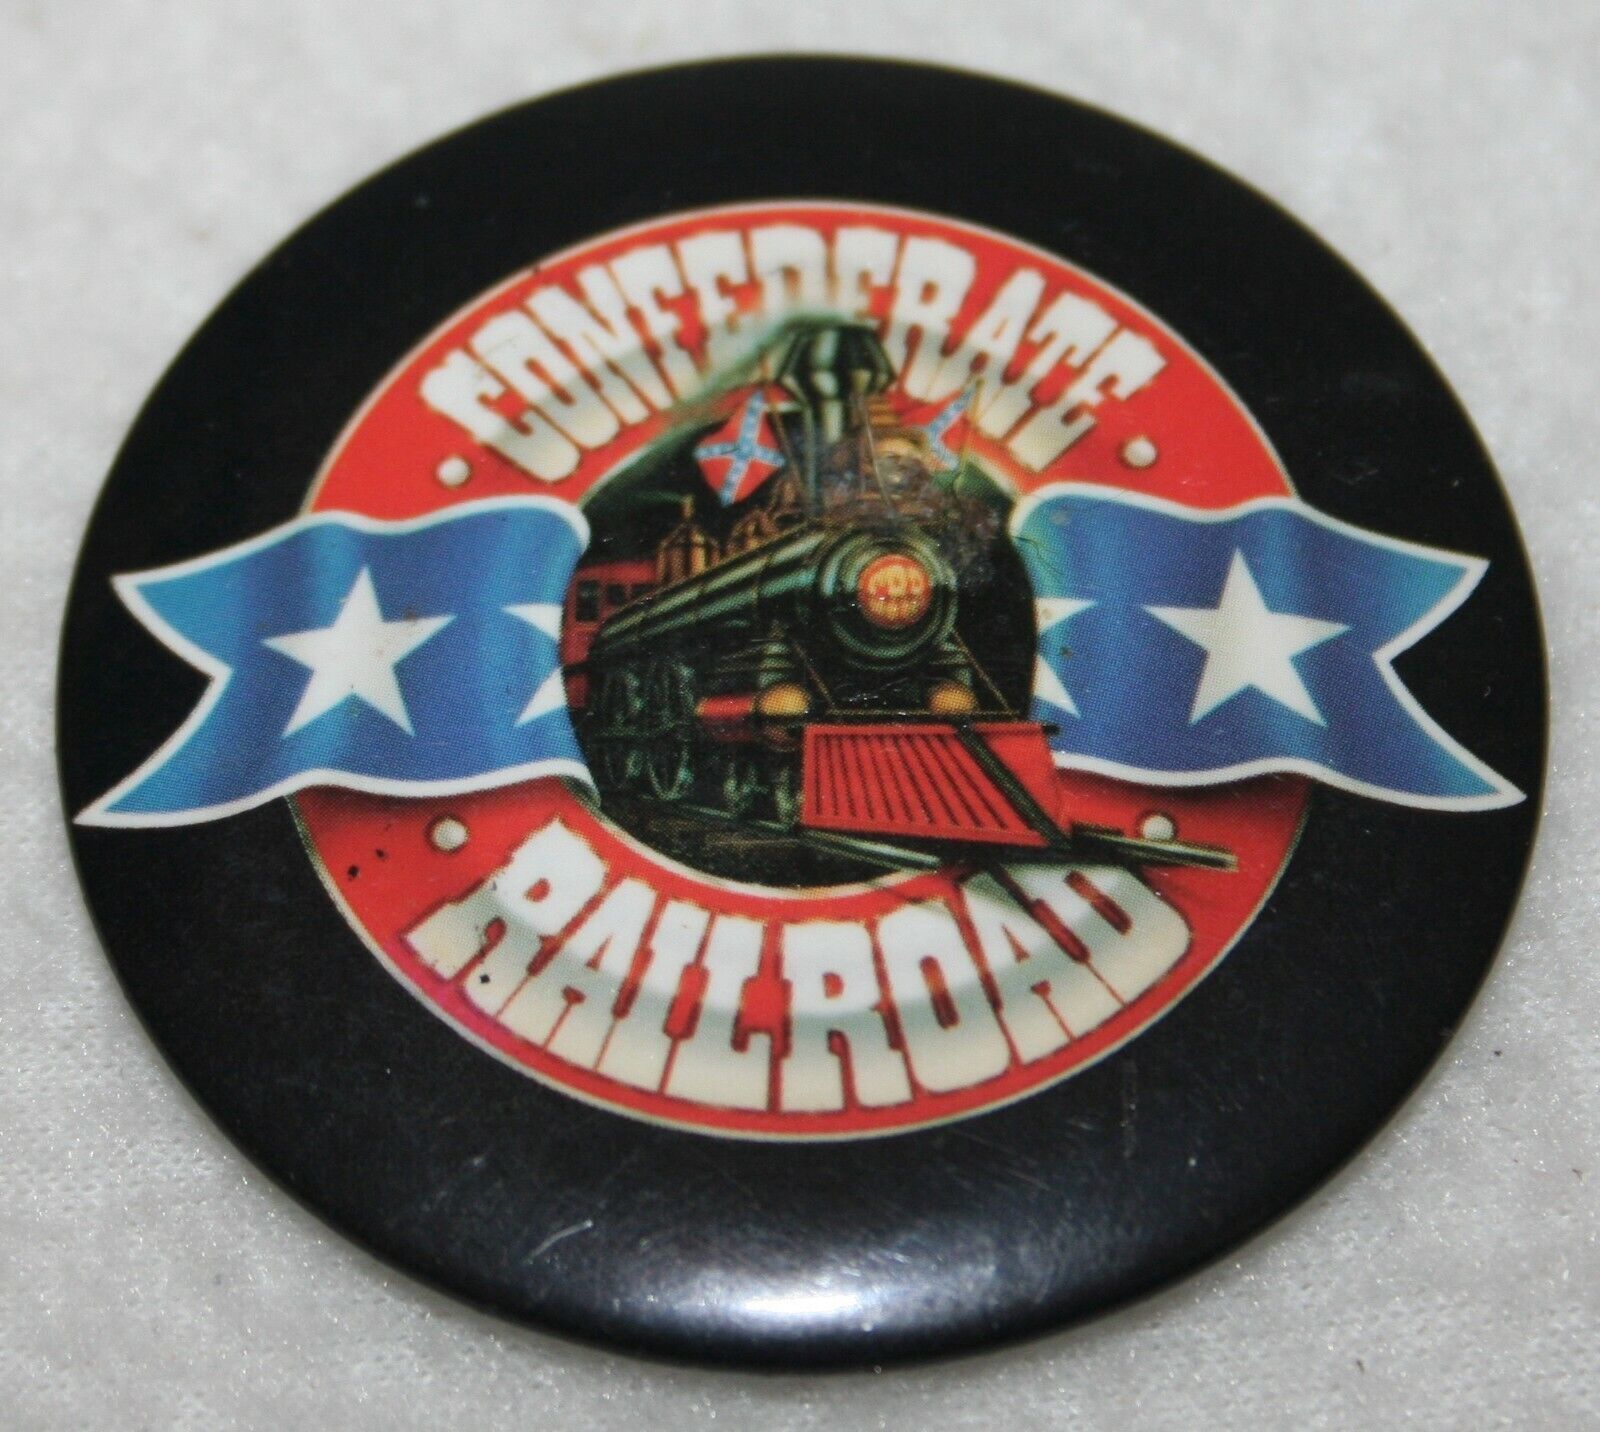 Primary image for Vintage 90s CONFEDERATE RAILROAD Country Music Band Pinback Button RARE